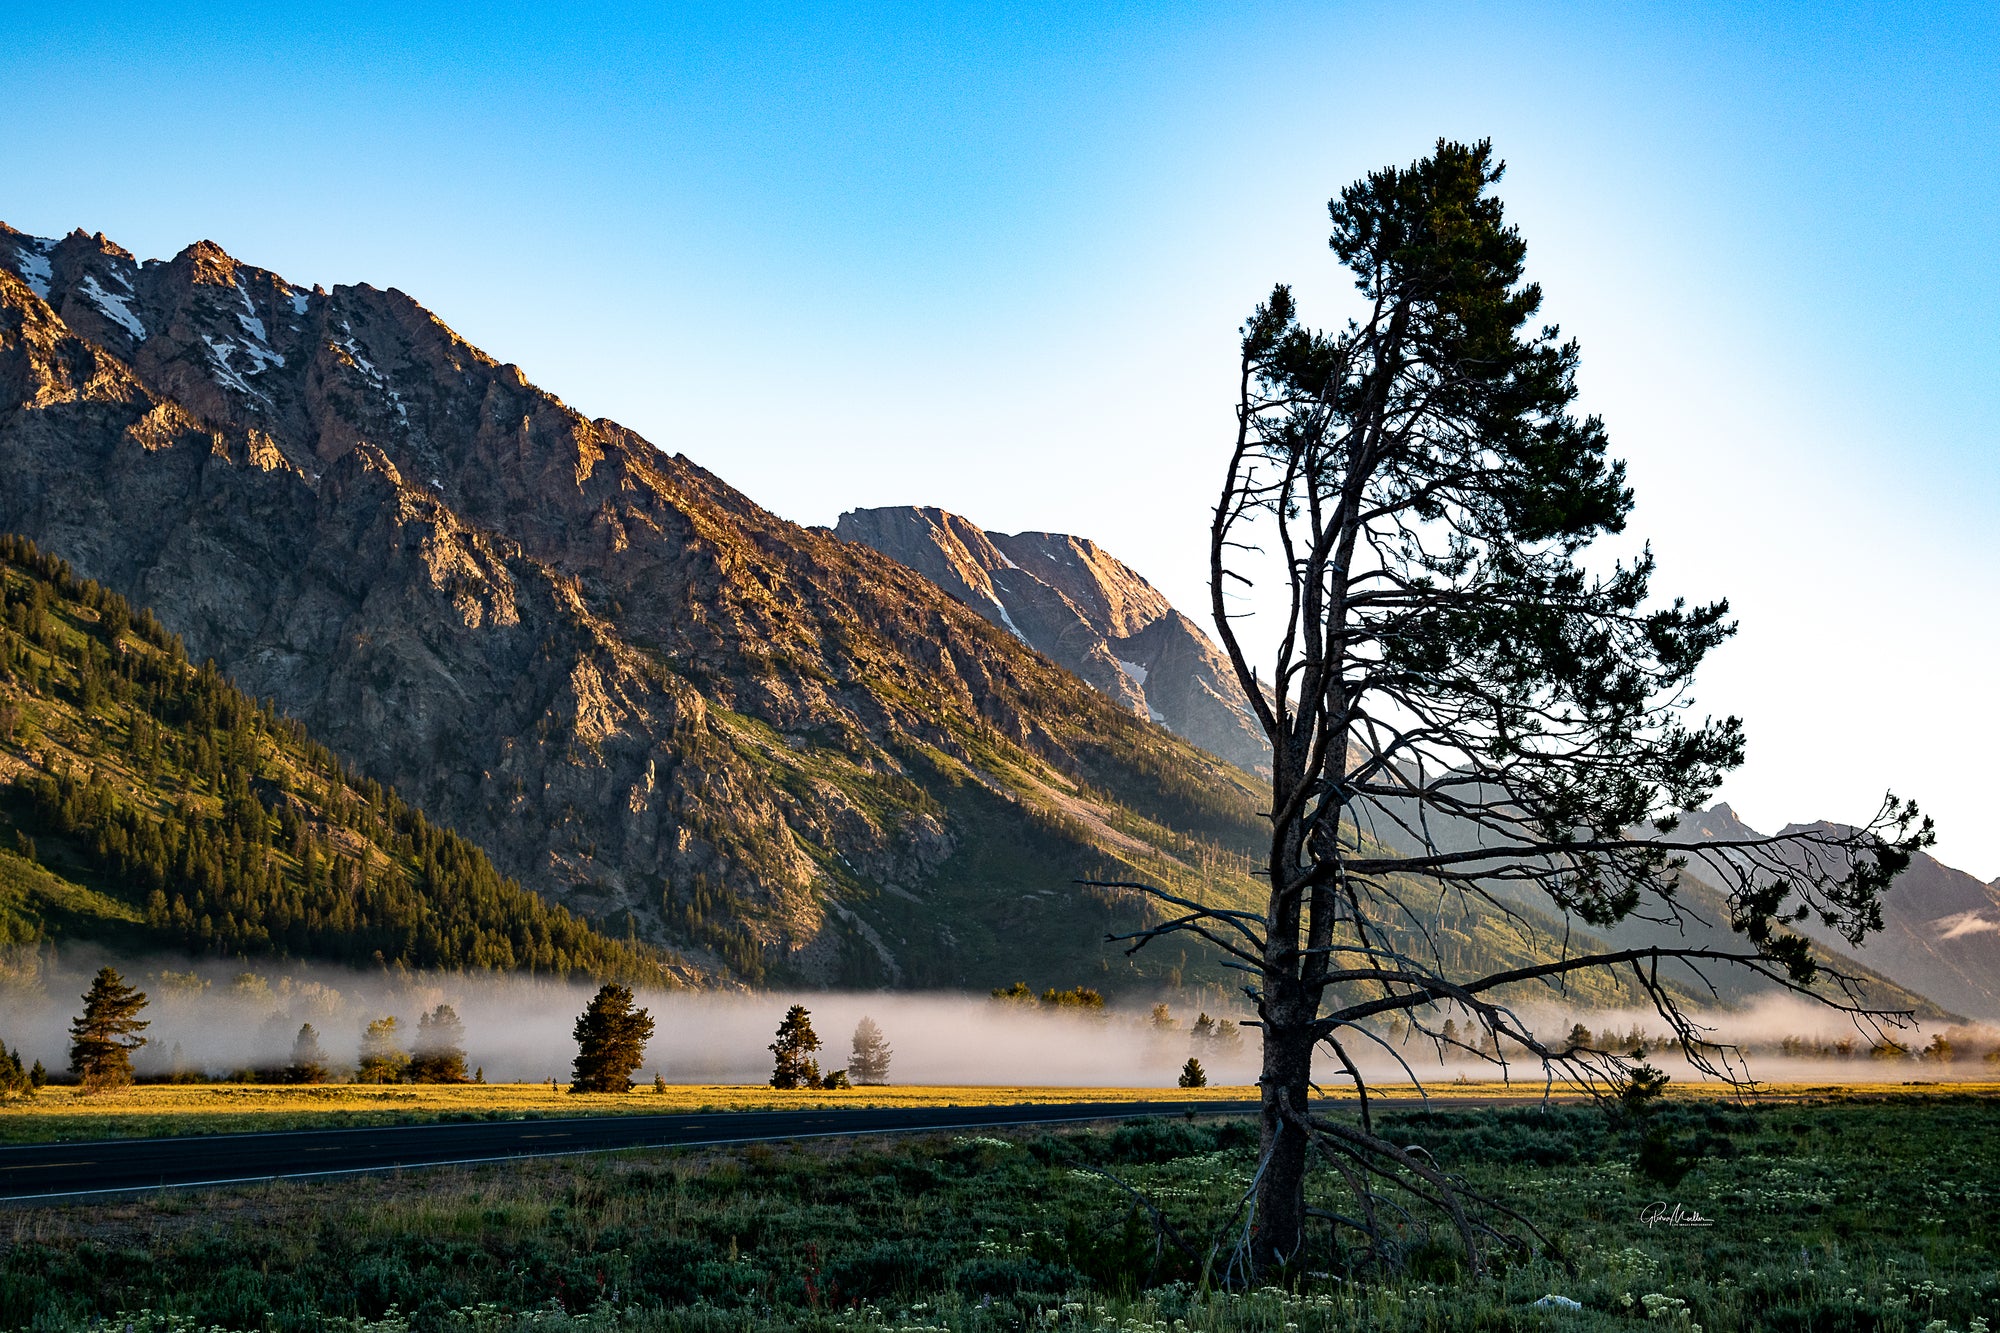 Low Hanging Fog at the Tetons